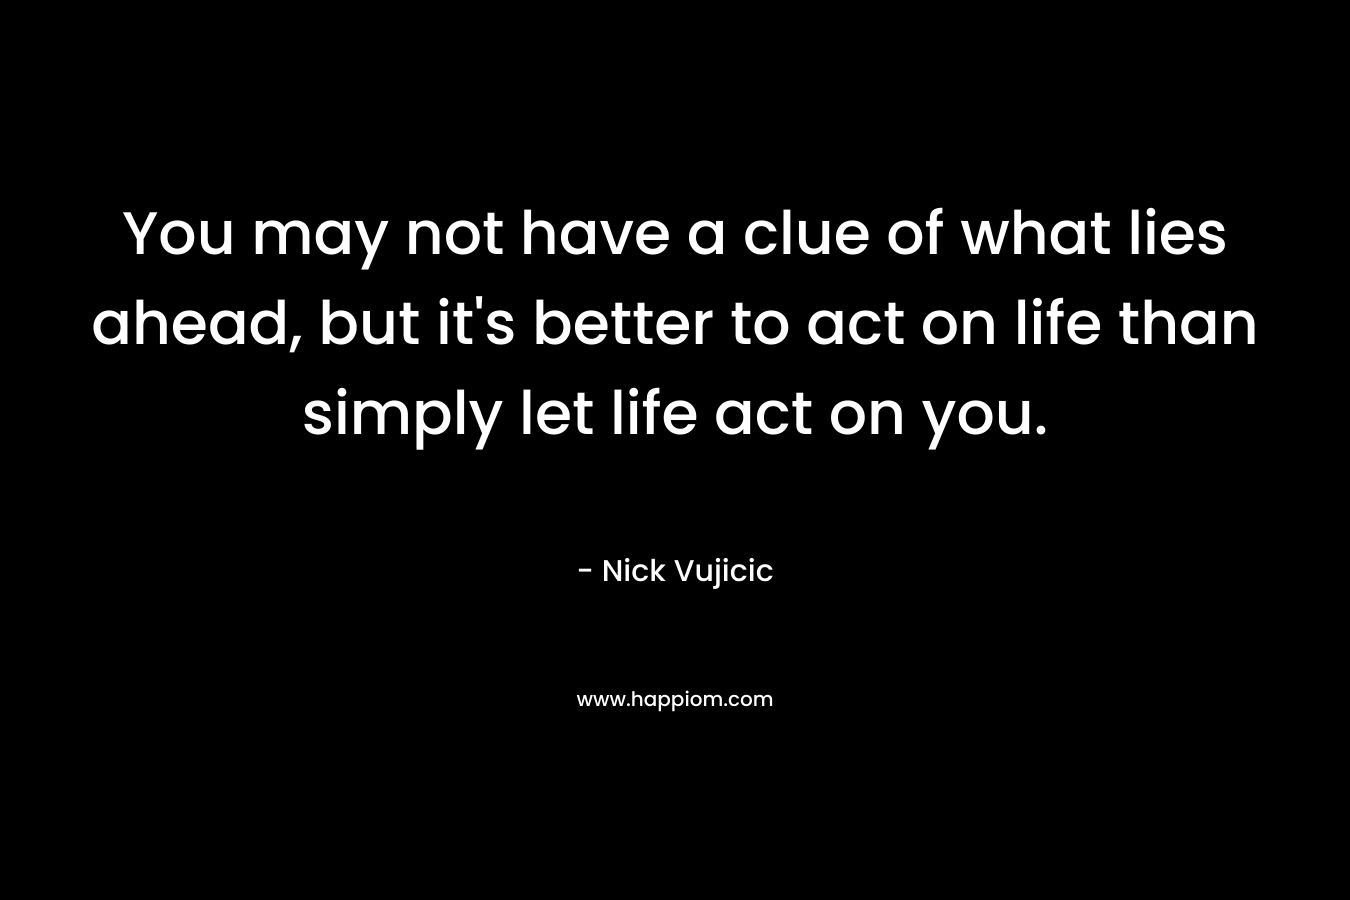 You may not have a clue of what lies ahead, but it’s better to act on life than simply let life act on you. – Nick Vujicic